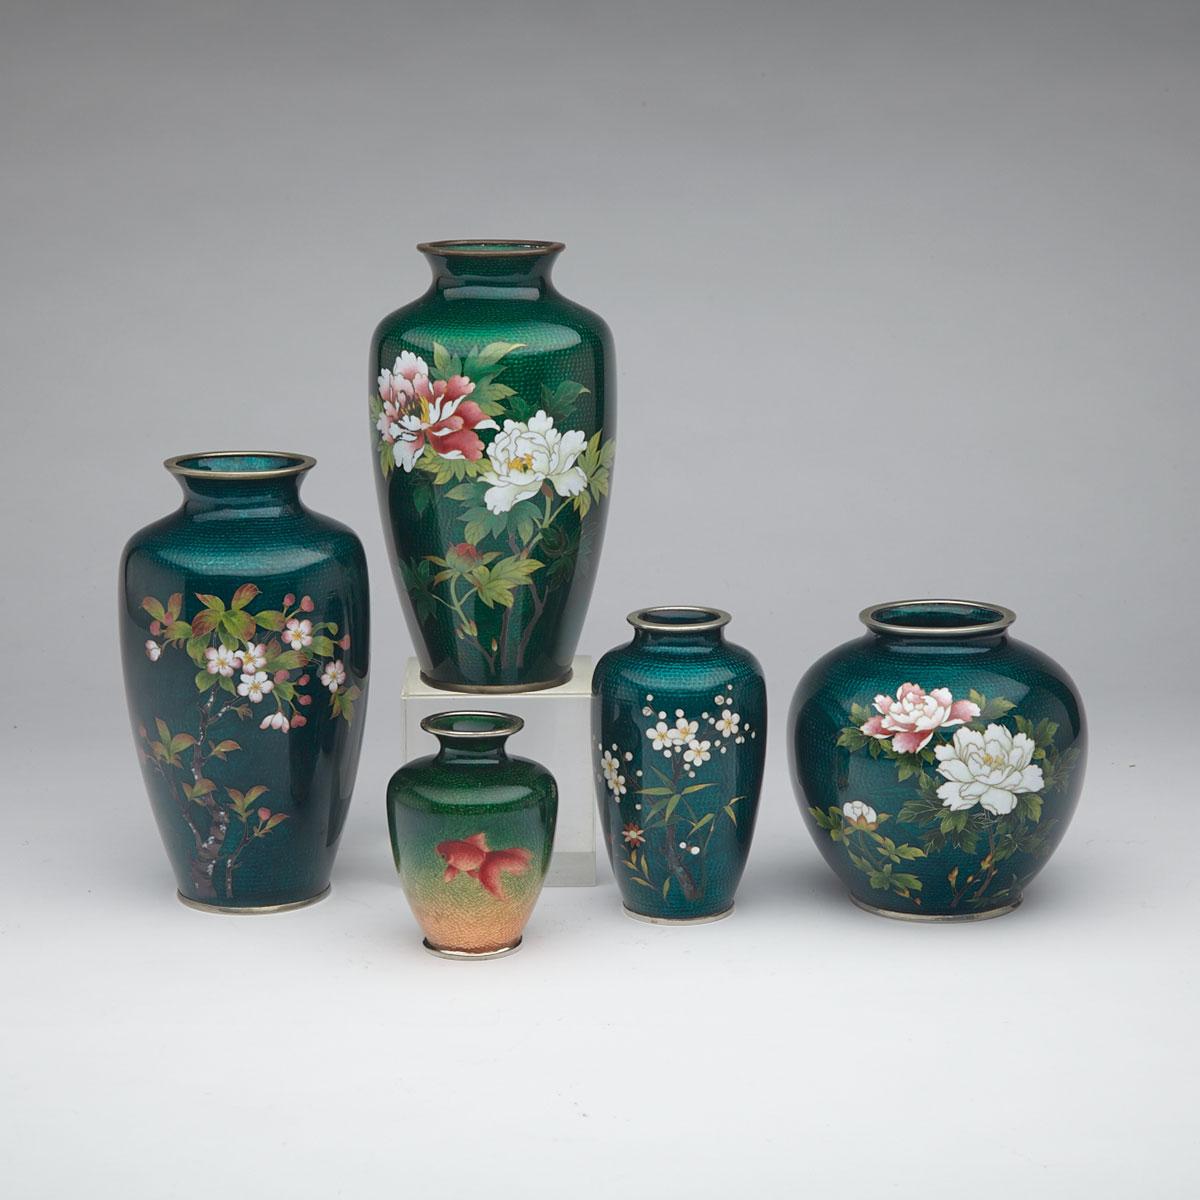 Group of Five Green Ground Cloisonné Enamel Vessels, First-Half 20th Century